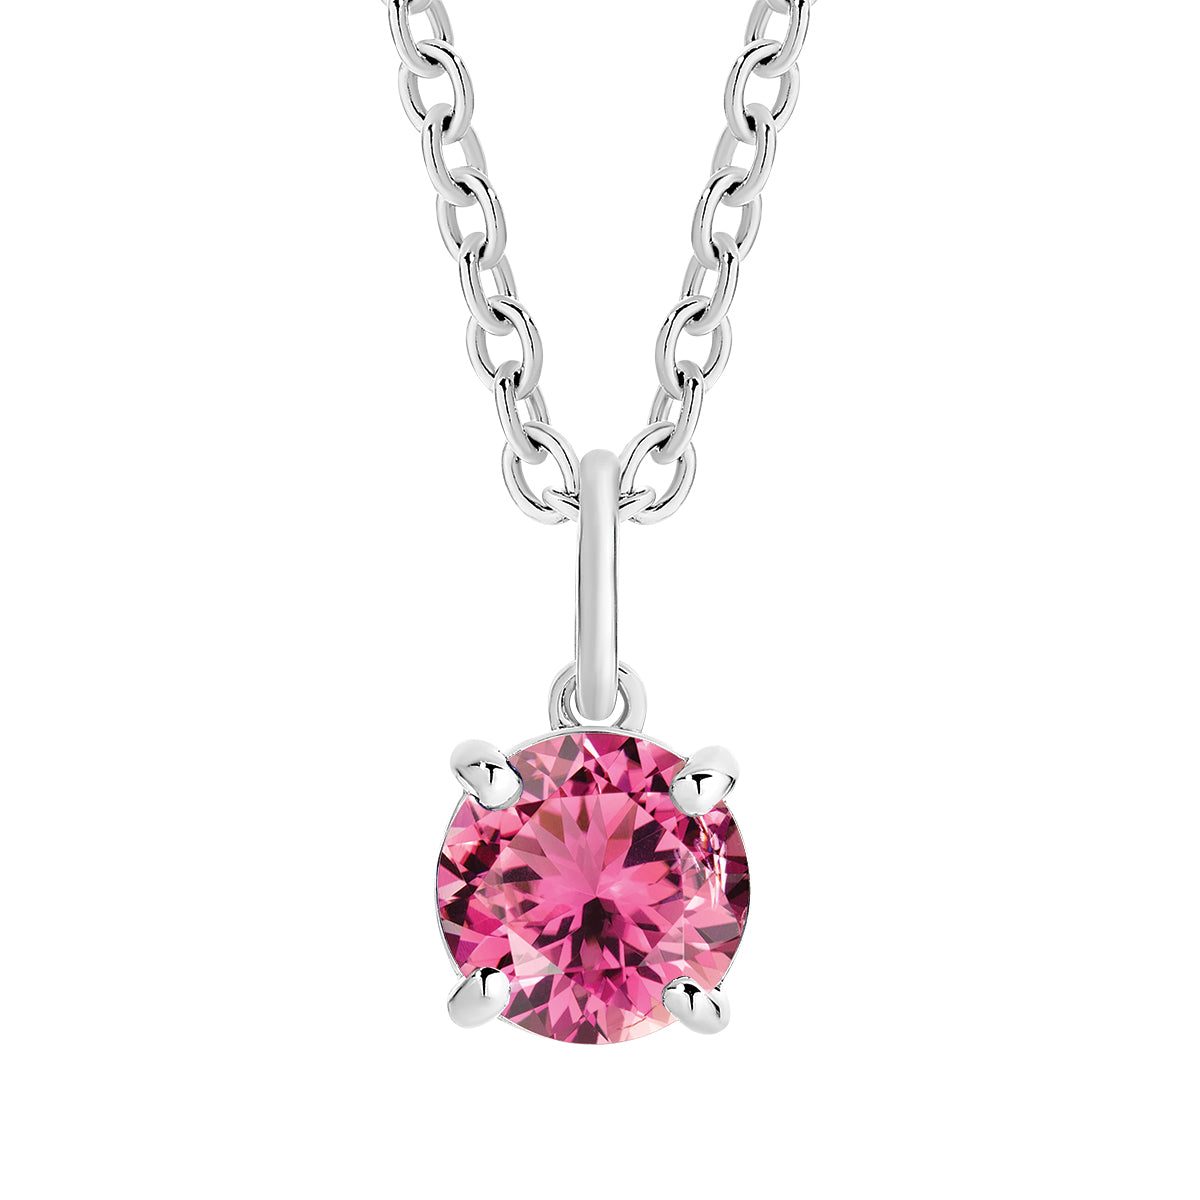 Natural 0.05ct round pink tourmaline pendnant in 9ct white gold